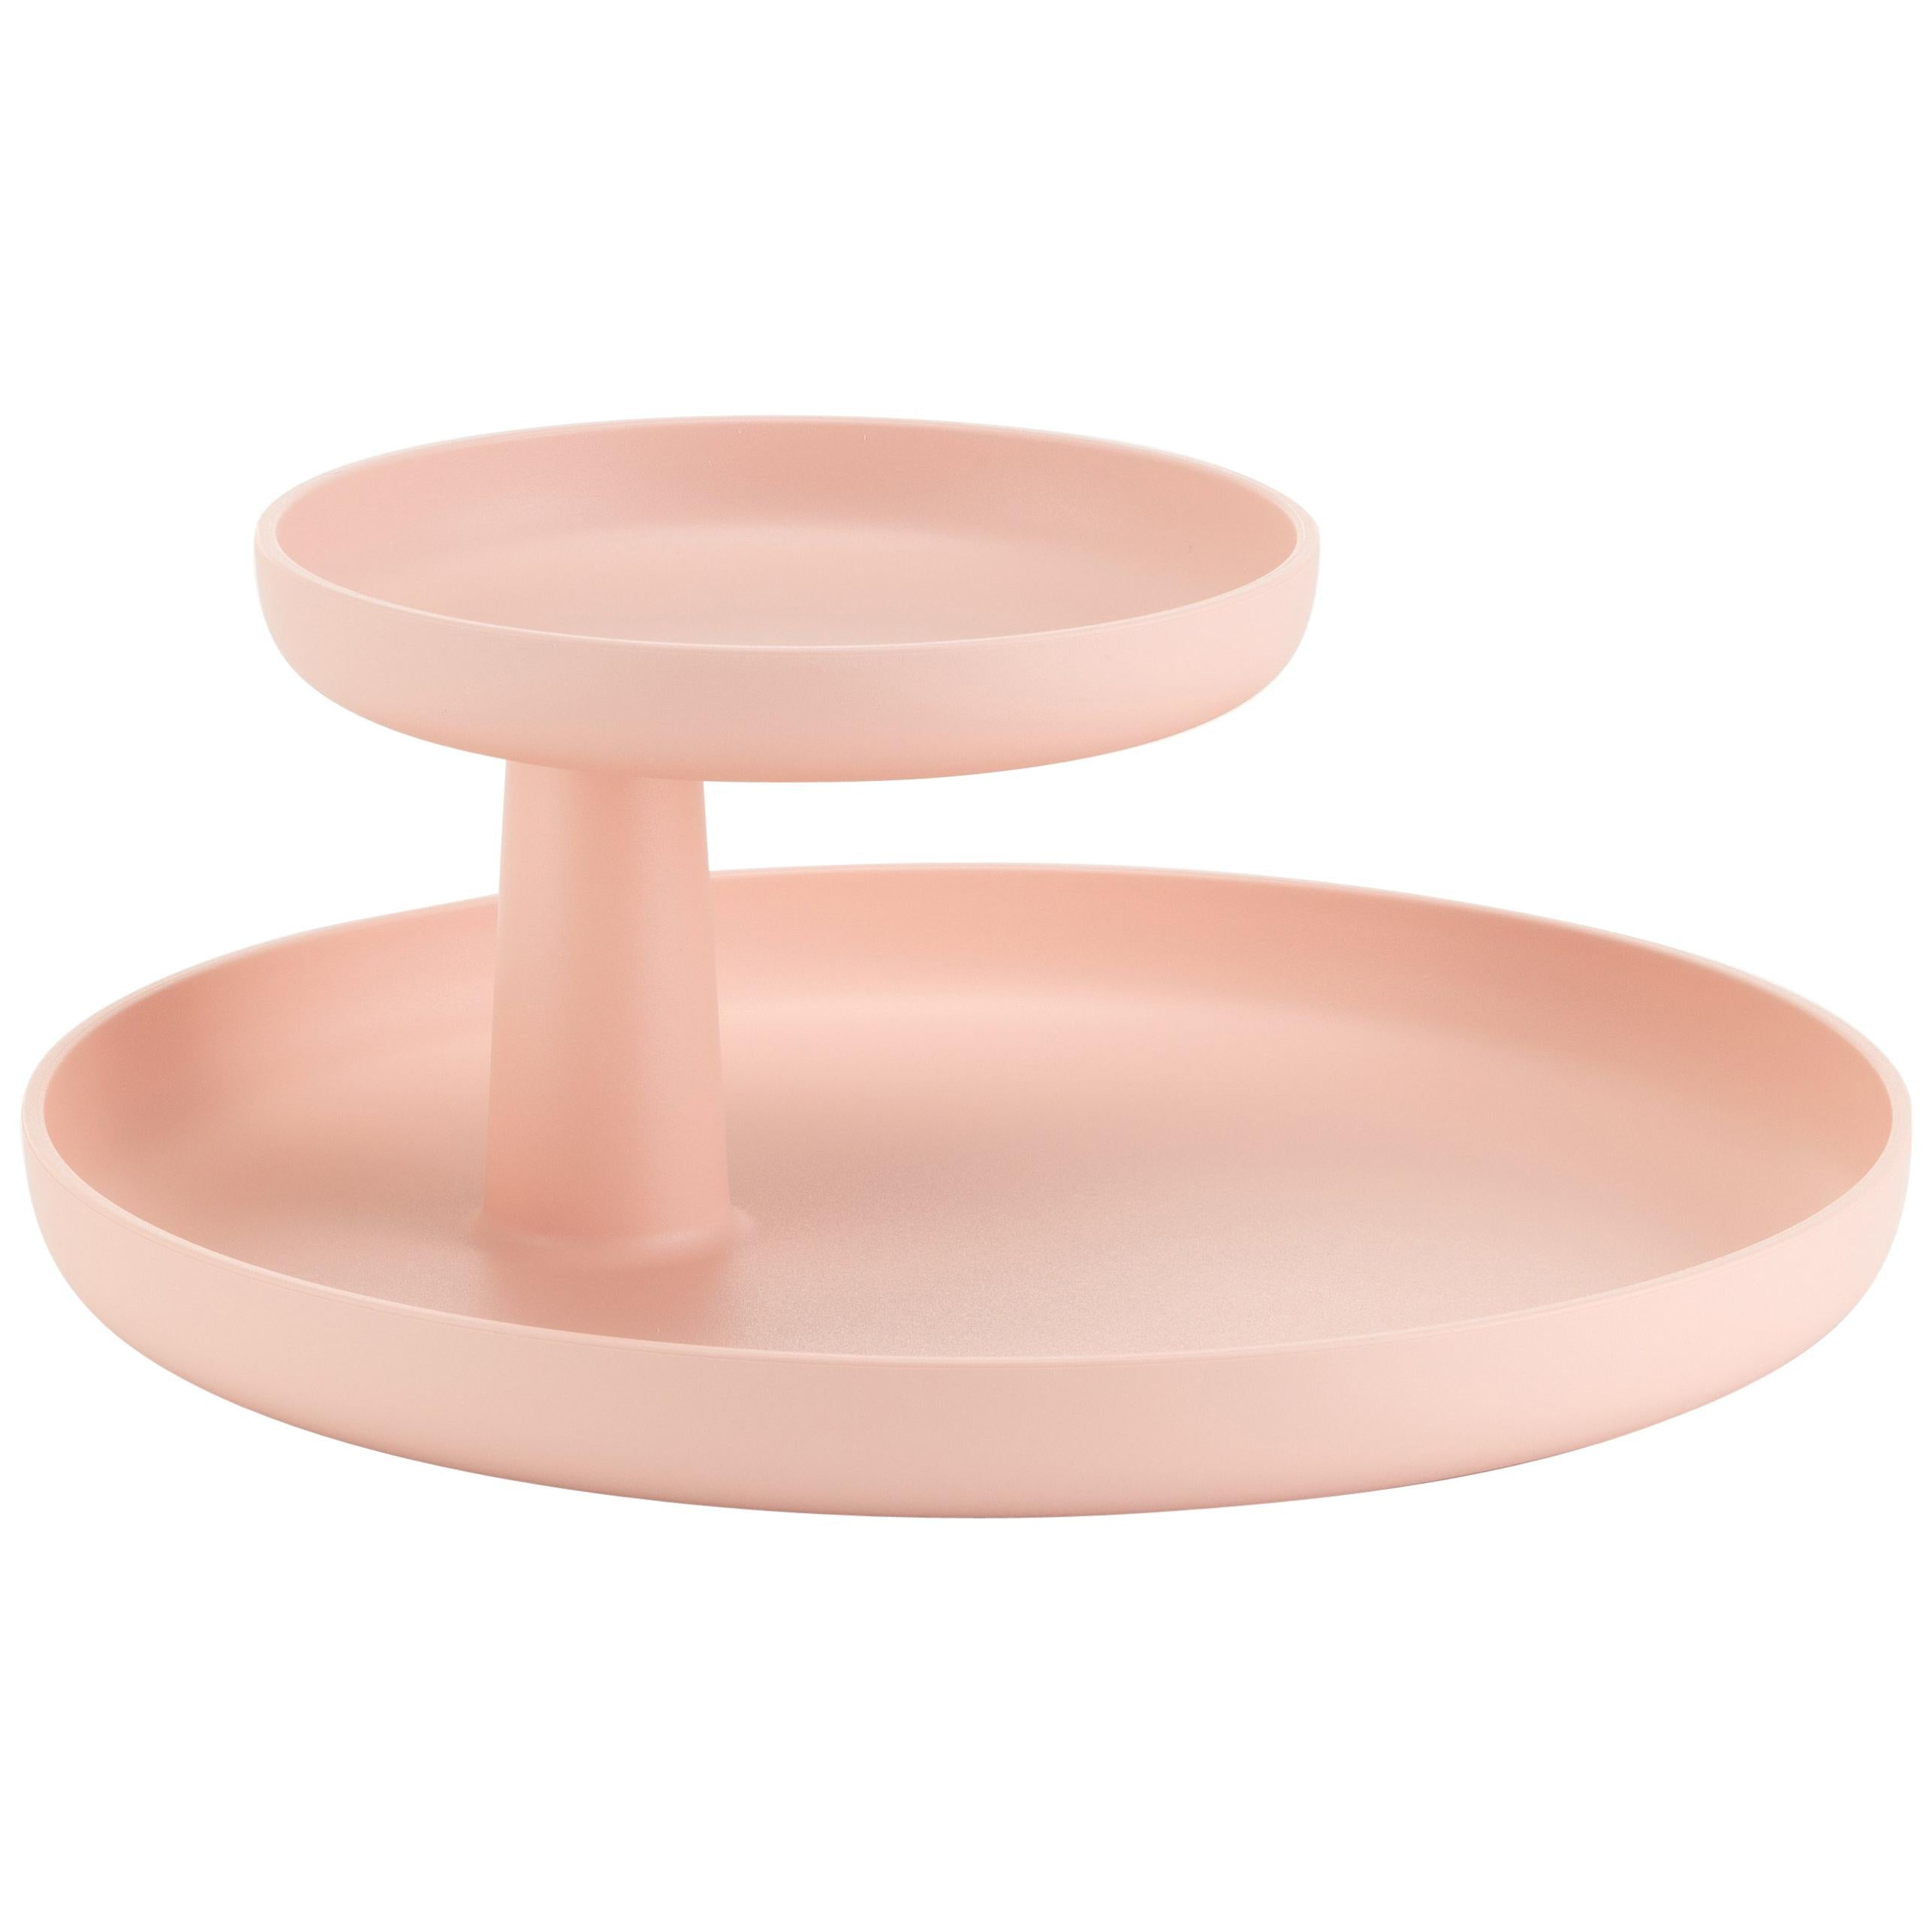 Vitra Rotary Tray in Pale Rose by Jasper Morrison For Sale